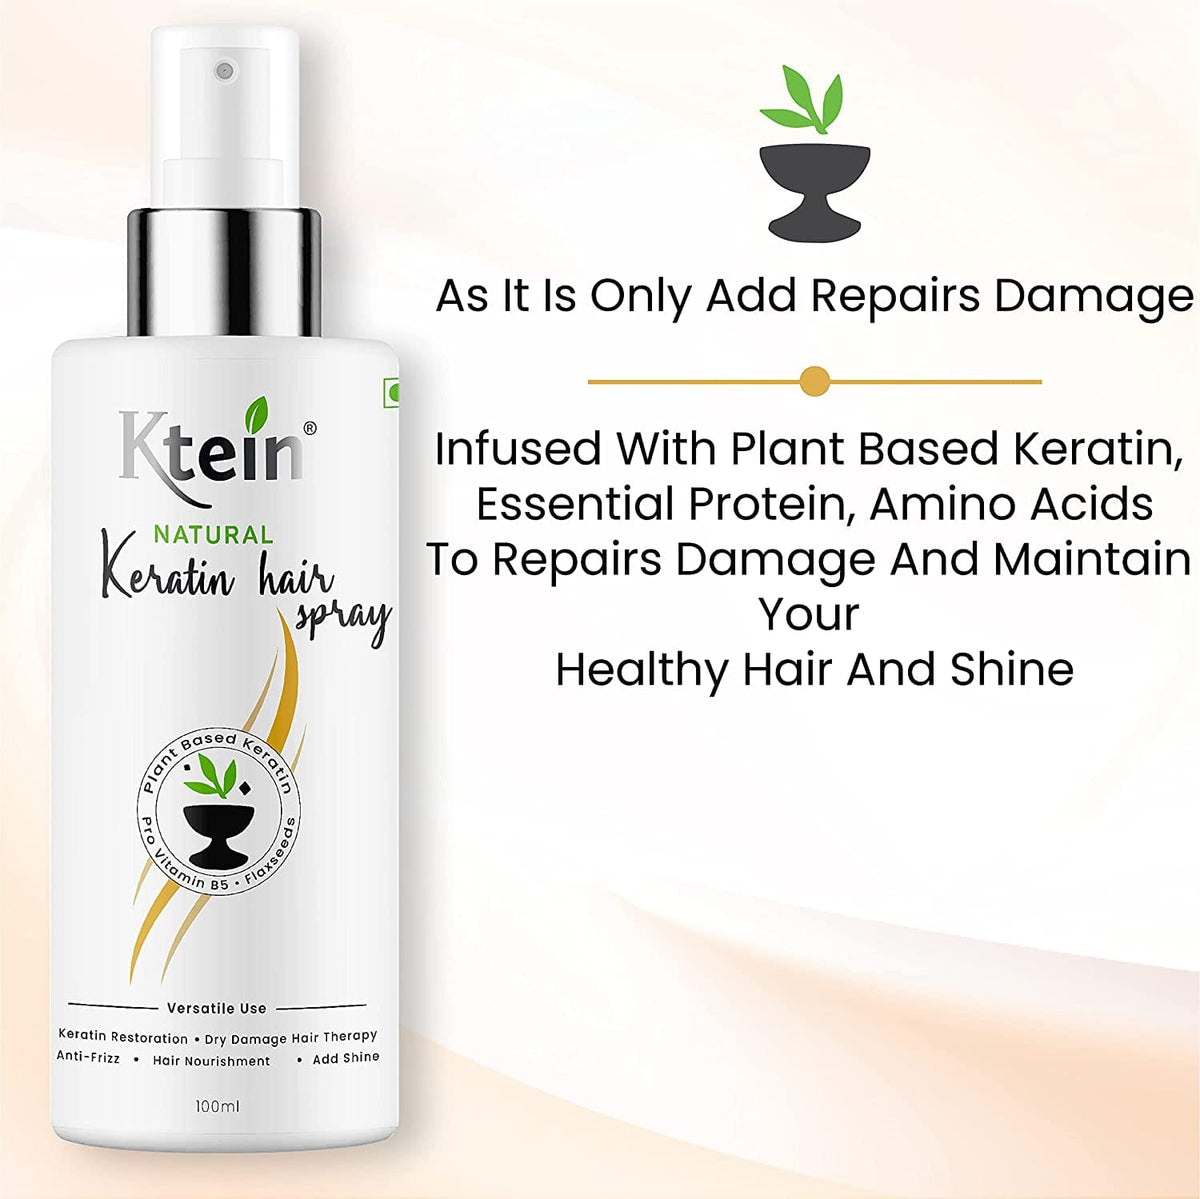 Ktein Natural Keratin Hair Spray 100ml - Ktein Cosmetics - Essence Of Natural Hair Care Products